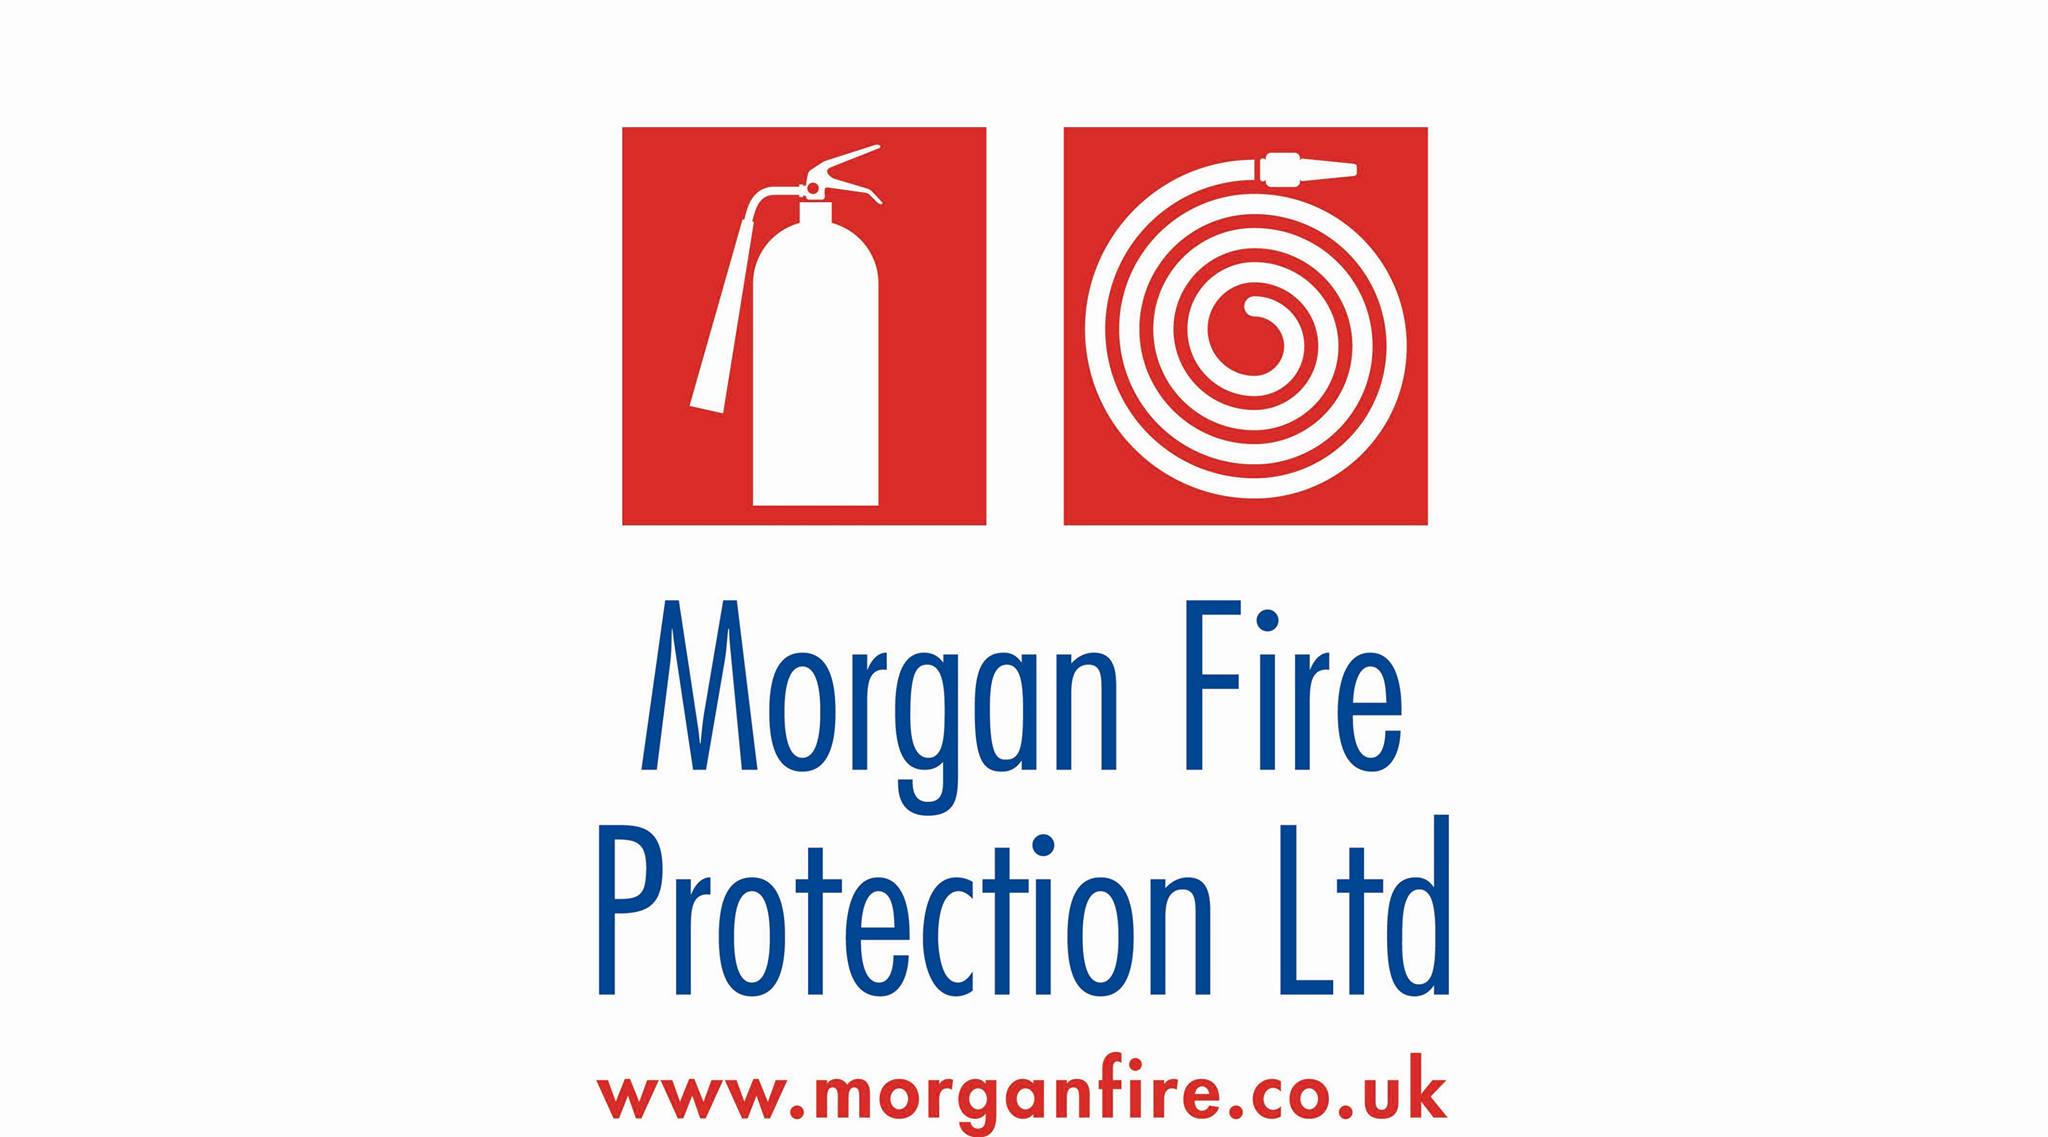 Morgan Fire Protection Limited